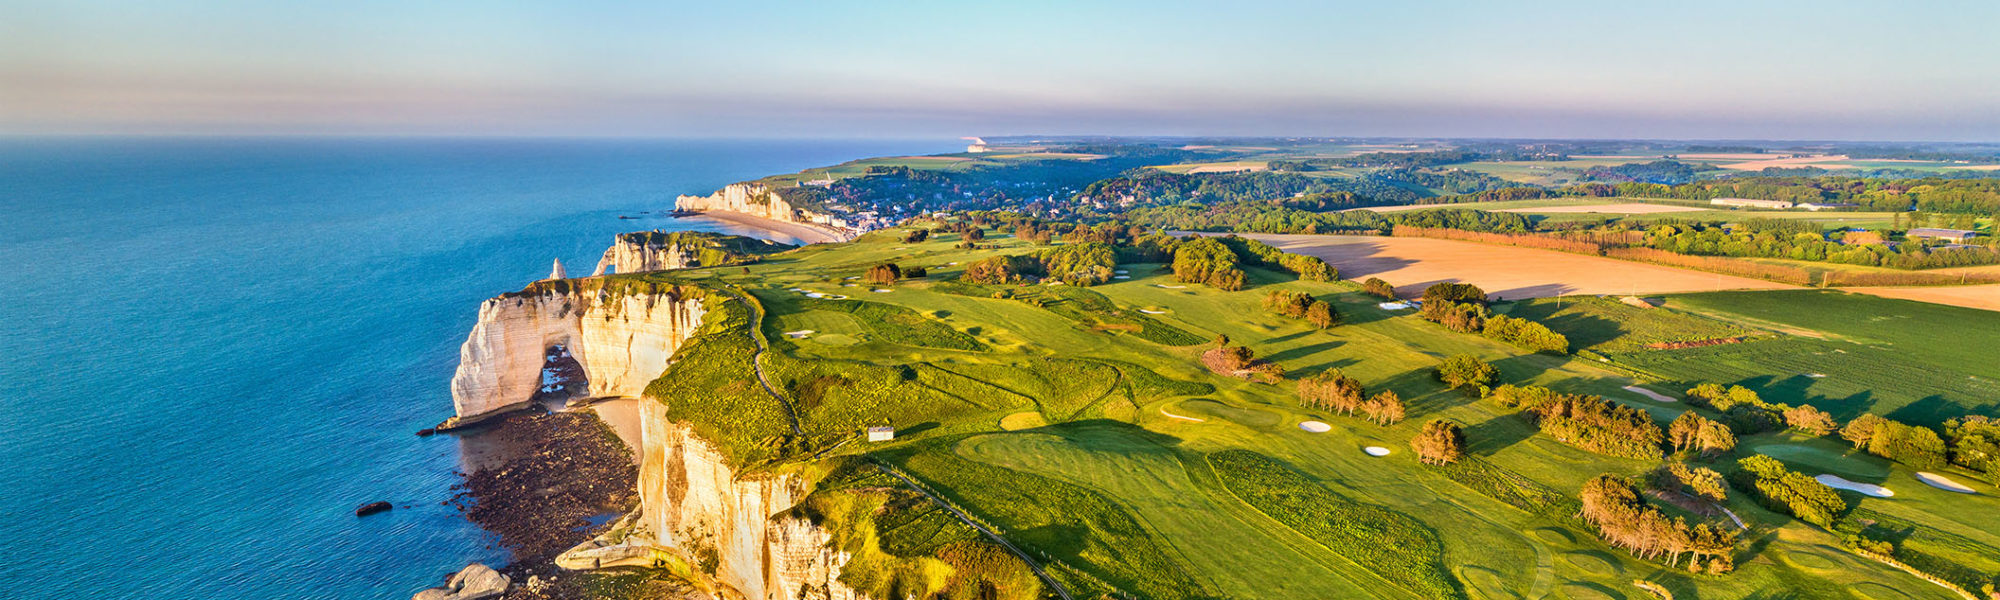 An aerial panorama of the Chalk Cliffs and the ocean through an excursion by Jaya Travel & Tours at Etretat in Normandy, France.